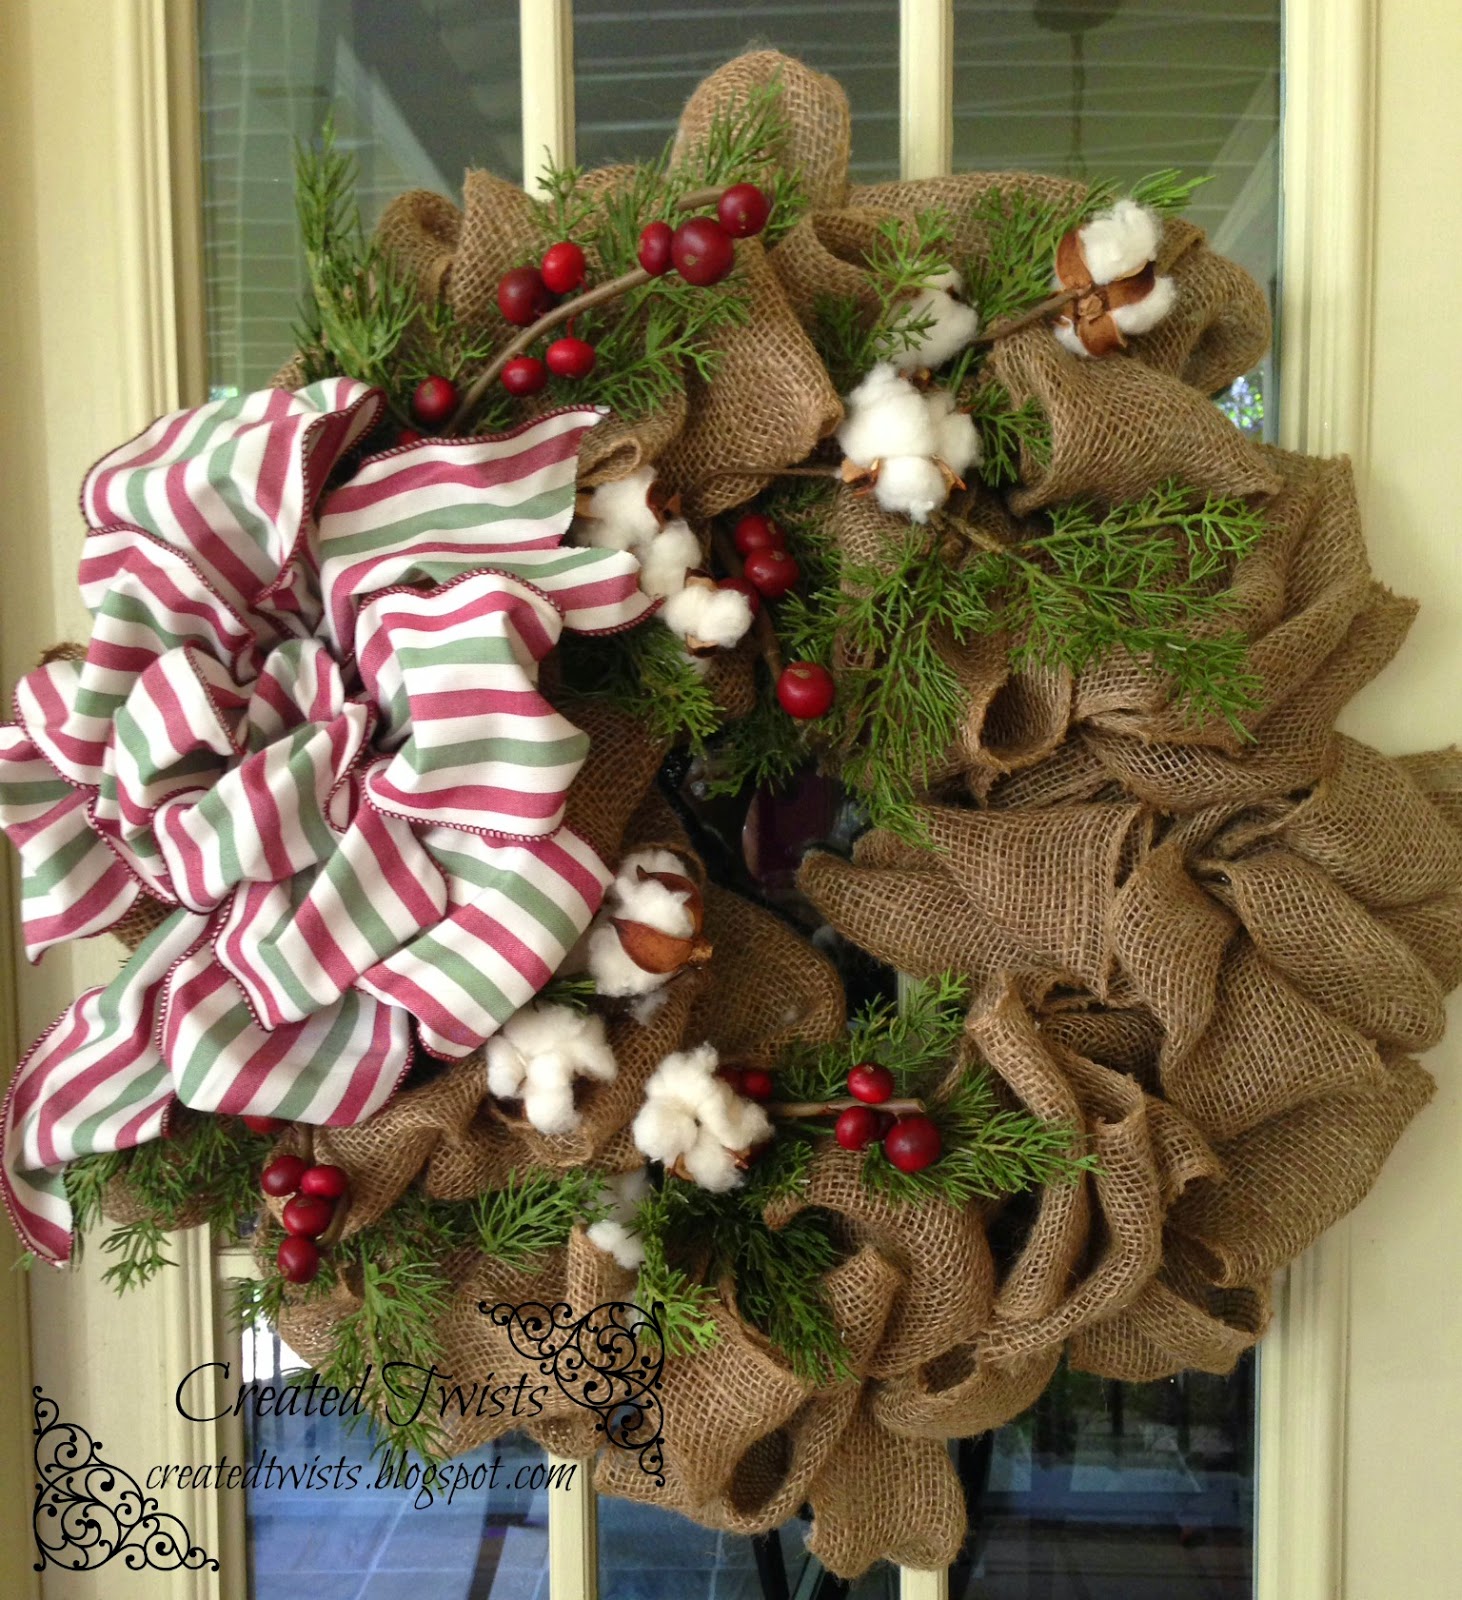 Created Twists: Burlap Christmas Wreath with Cotton, Pine and Berries